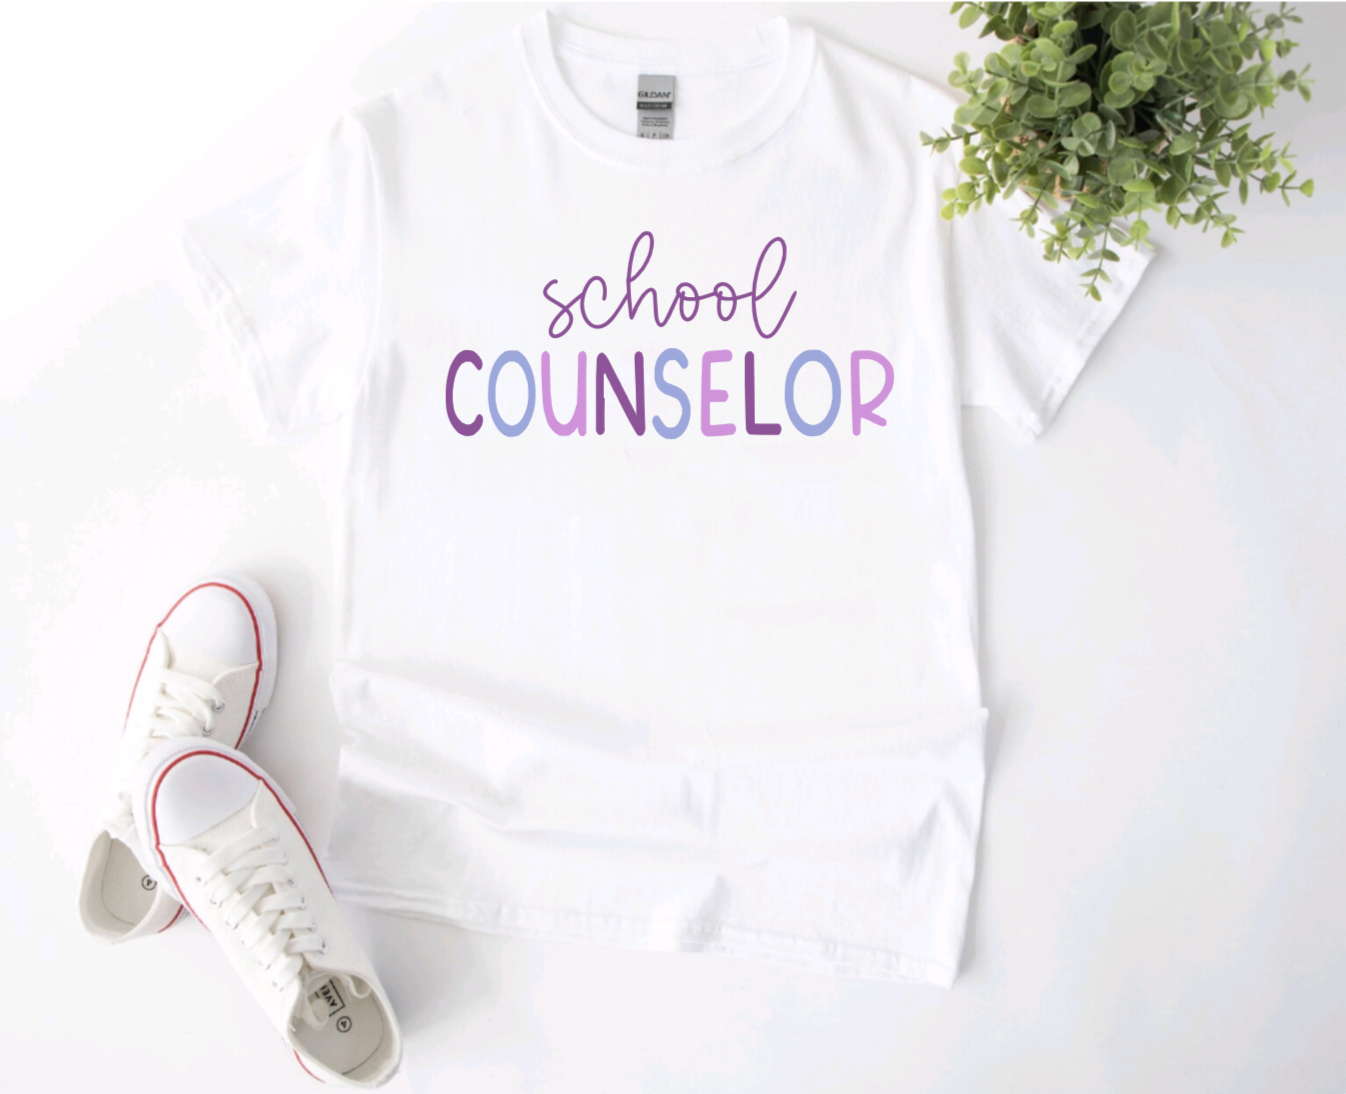 School Counselor White Tee